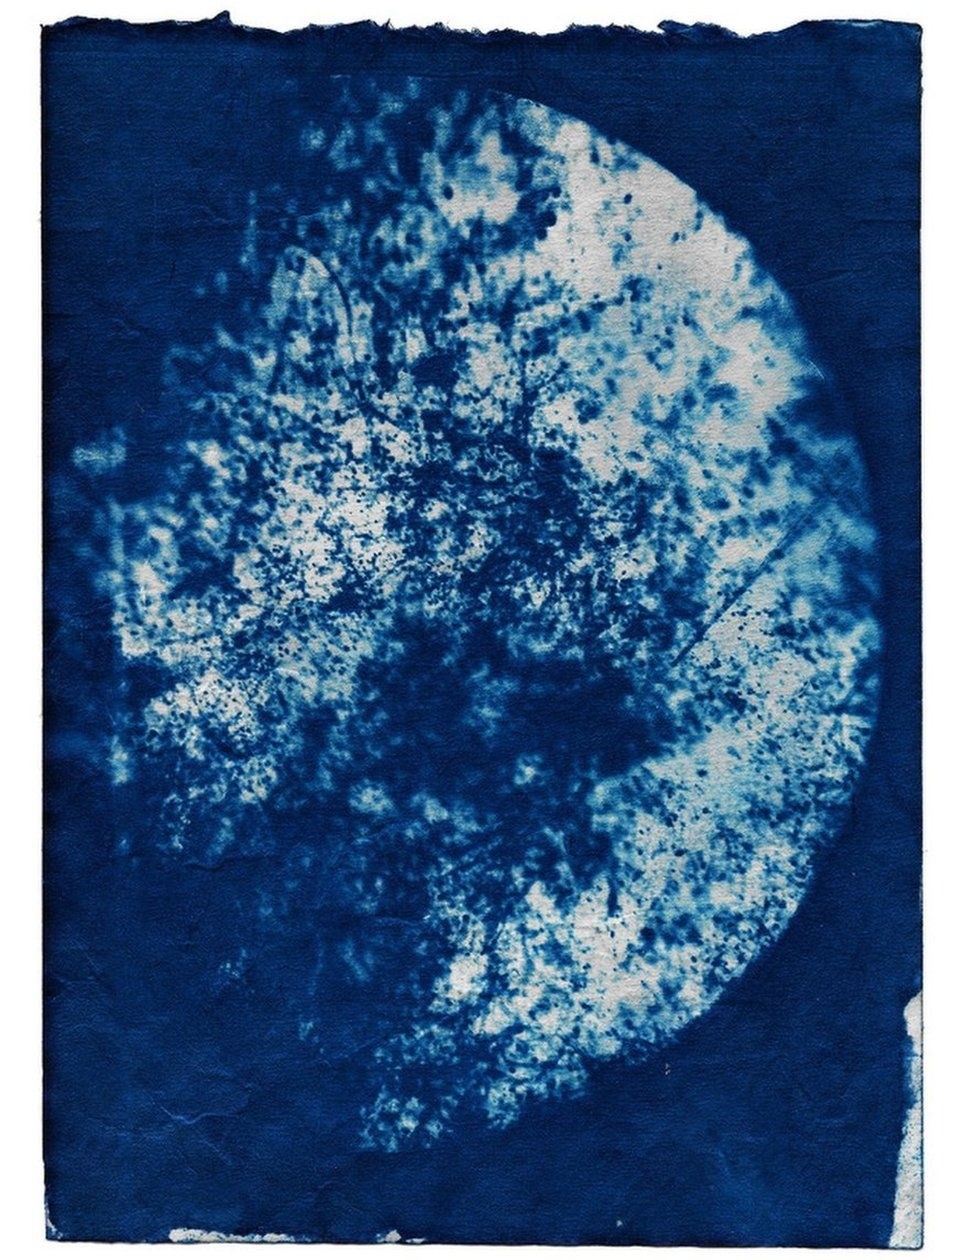 A blue photograph of pollution in London captured with an old photo technique